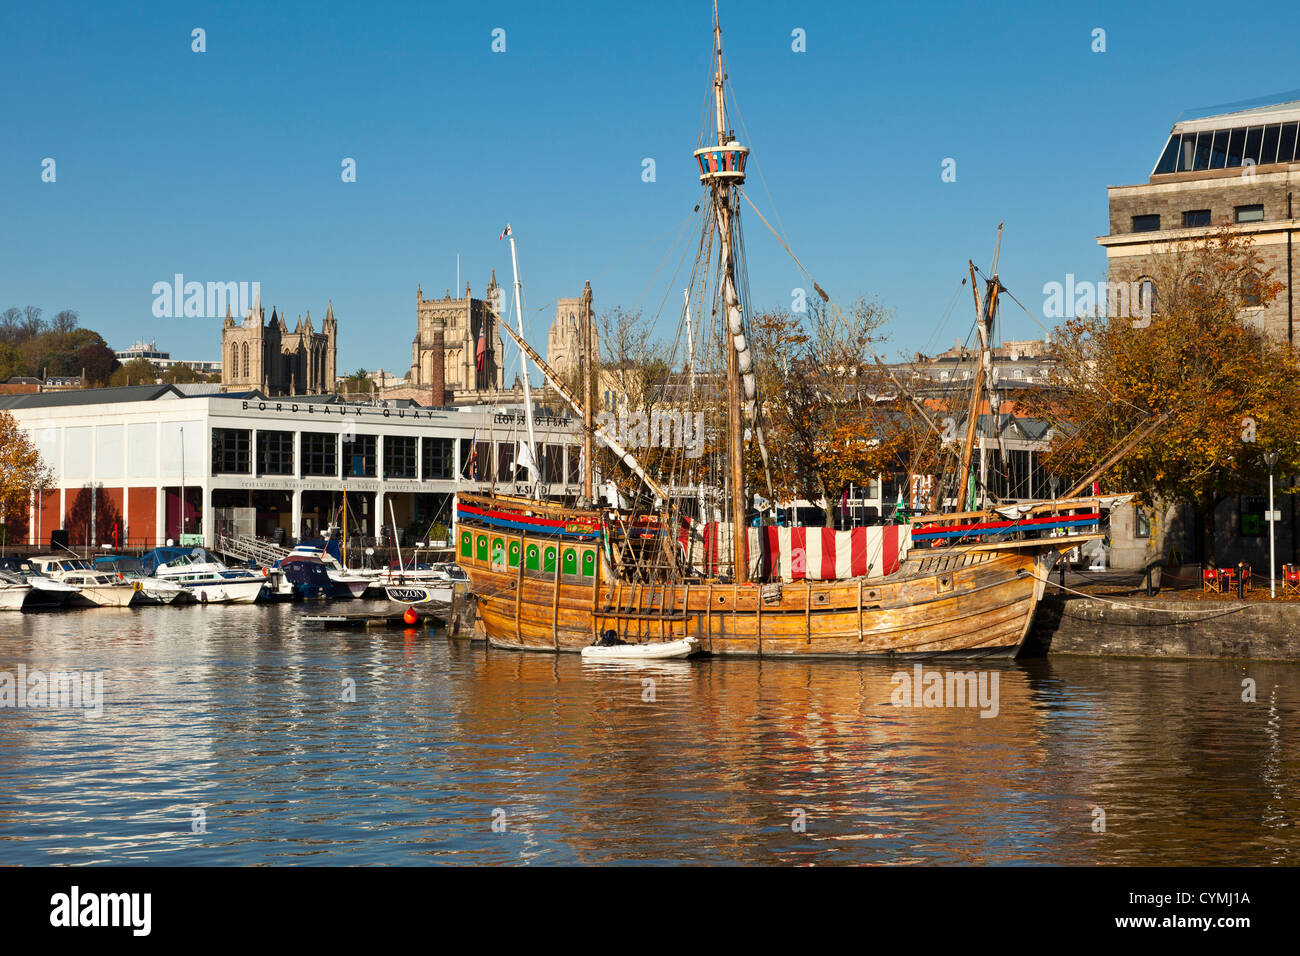 'The Matthew' replica of the ship John Cabot discovered north America in 1497 moored in Bristol floating harbor harbour. Stock Photo